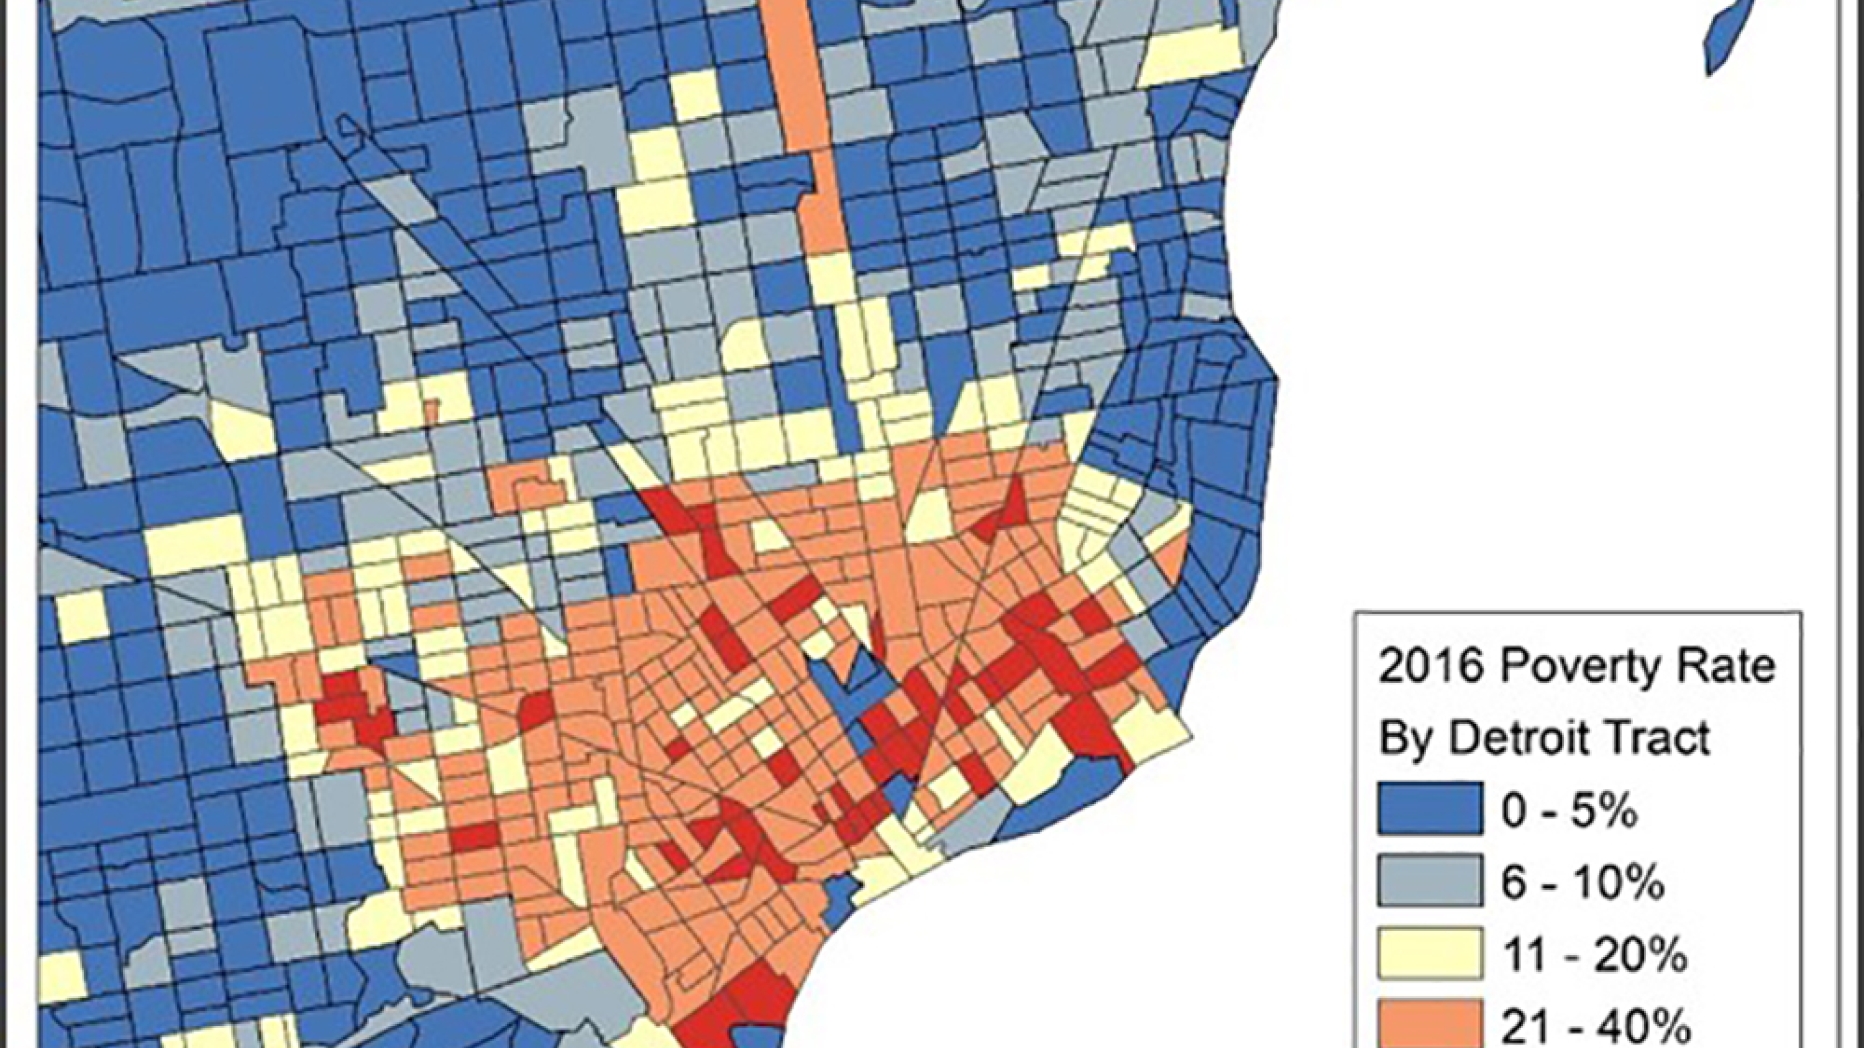 Map of poverty rates in detroit.